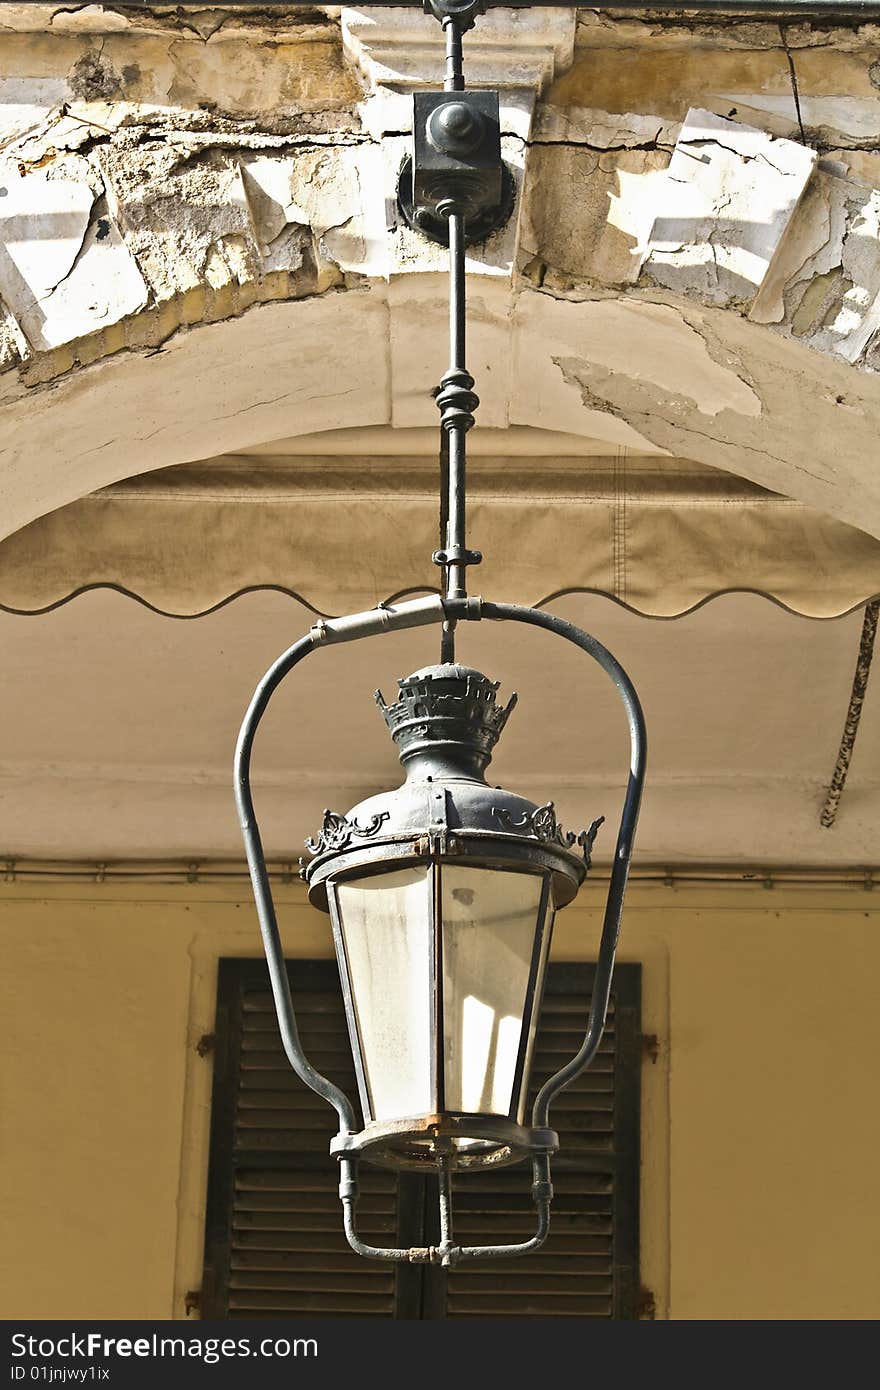 Building with traditional light(s) in an old lantern shape. Building with traditional light(s) in an old lantern shape